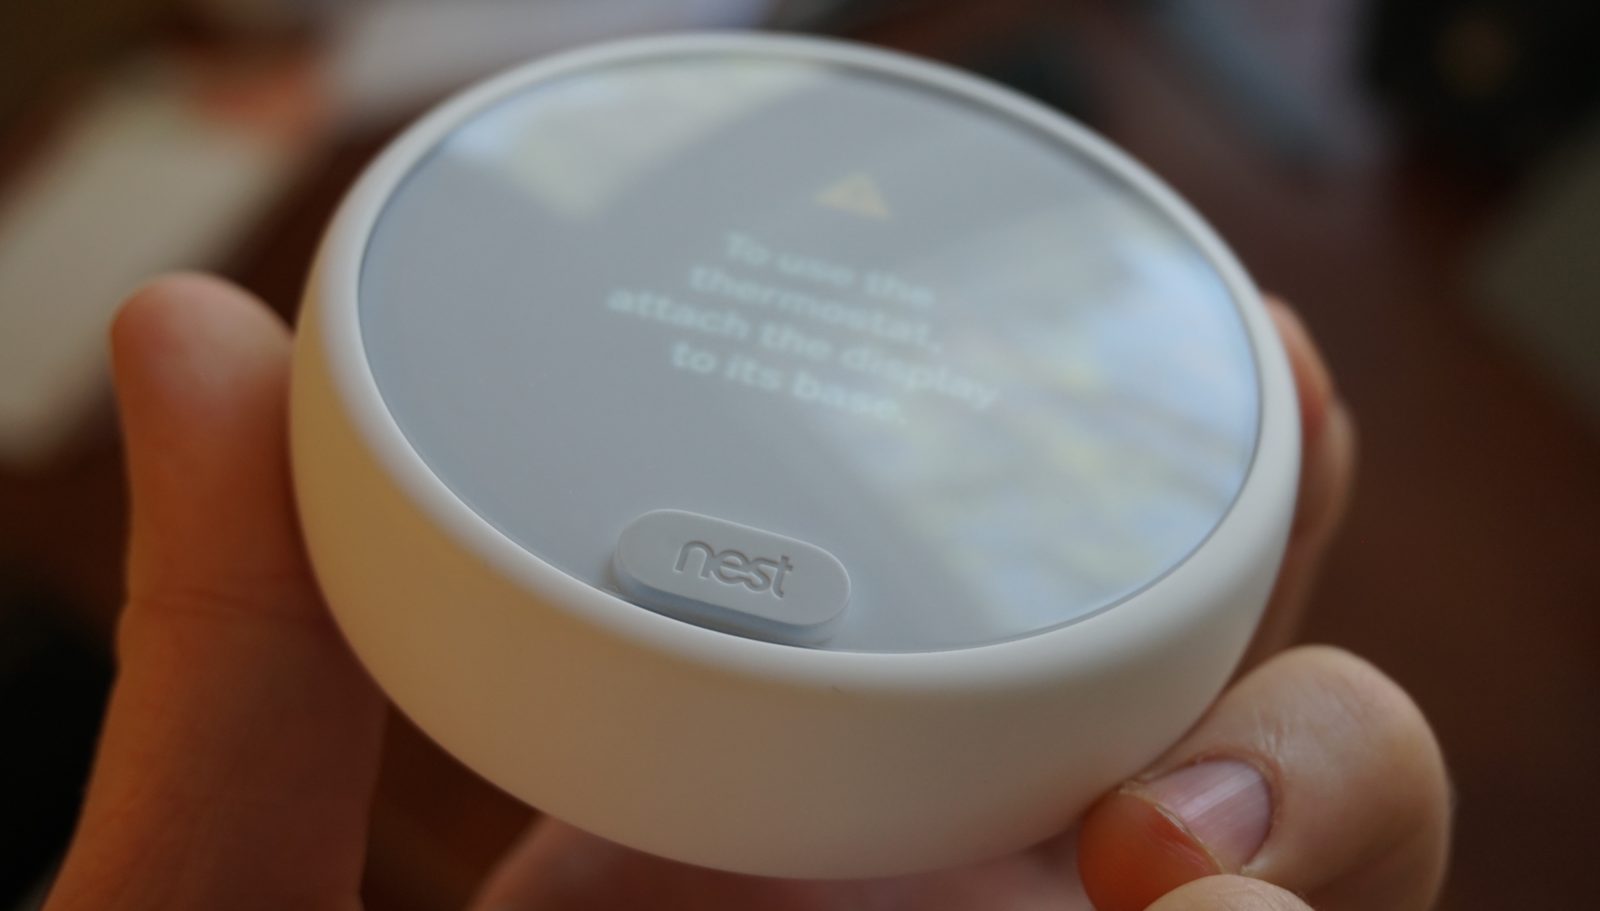 Nest Diary: Set up, impressions, and review of the Nest Thermostat E